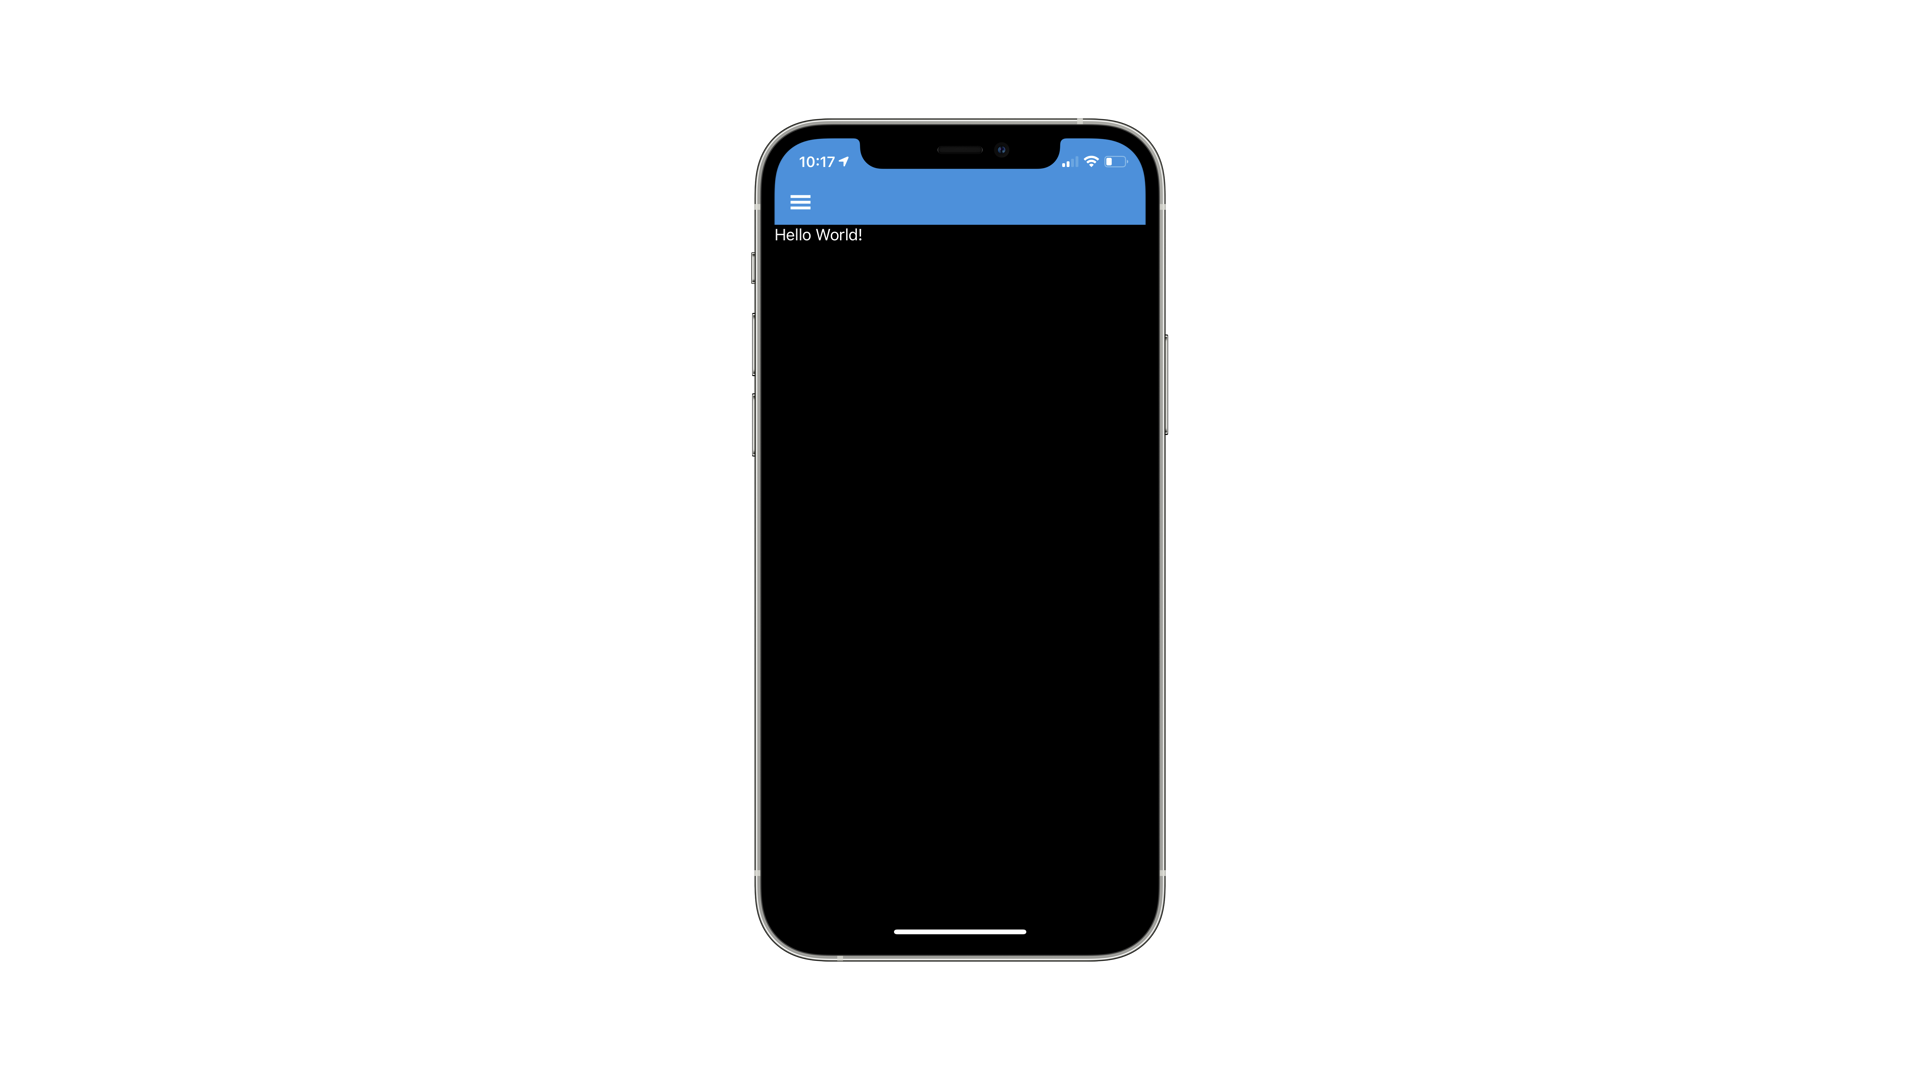 Mobile application with black background and white text Hello World!